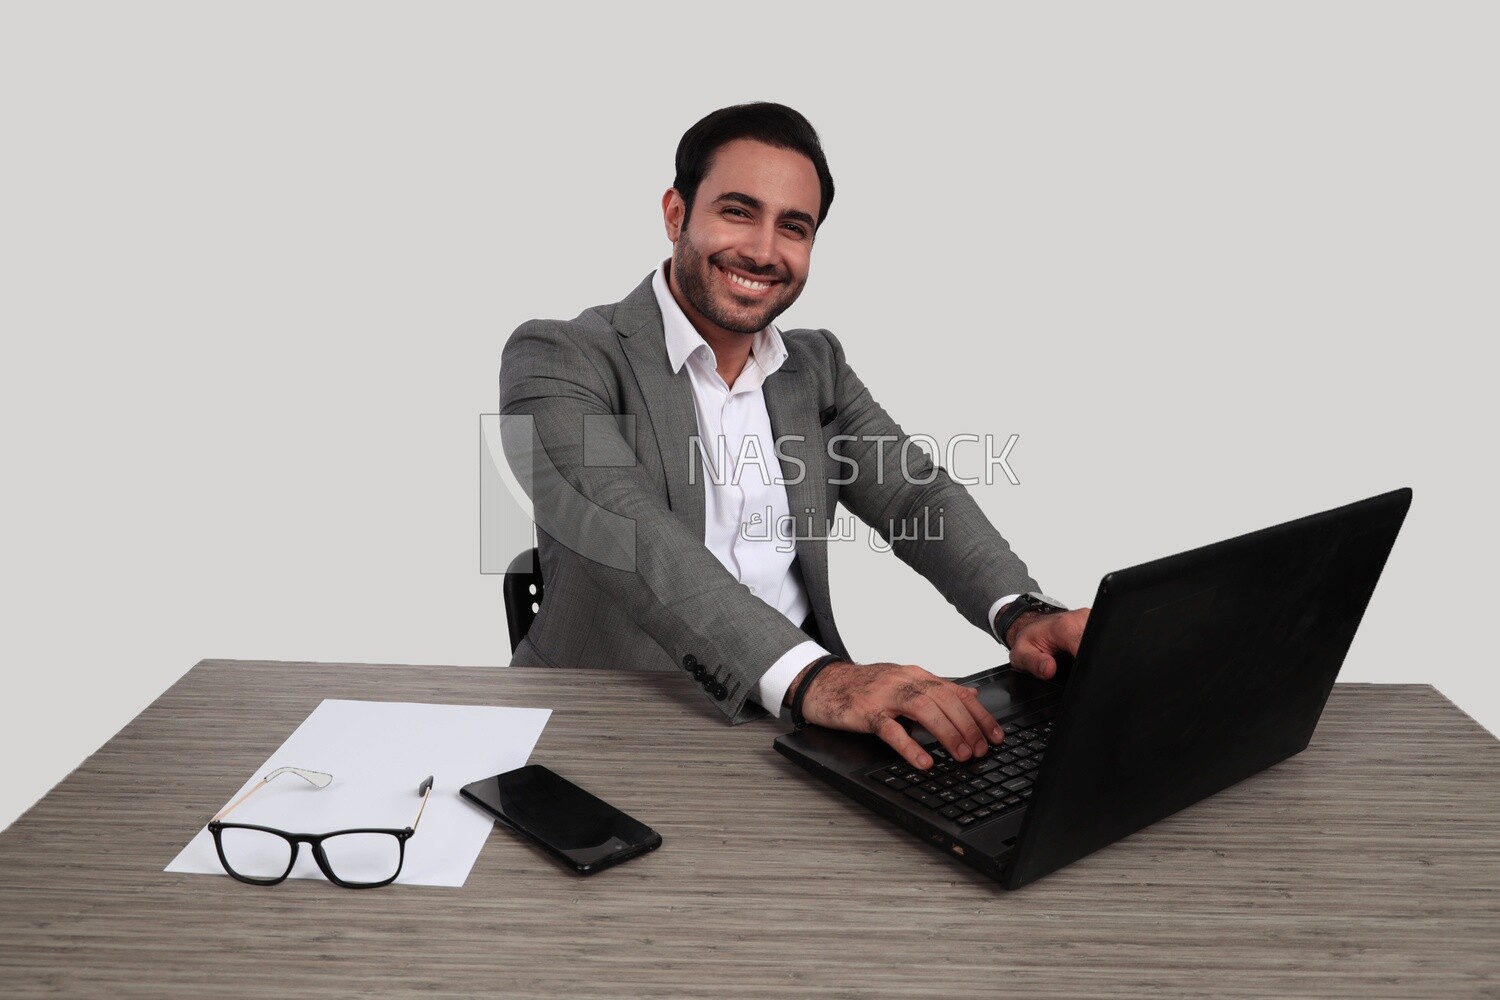 Photo of a businessman with a formal suit sitting at a desk working on a laptop looking happy, business development and partnerships, business meeting, Model